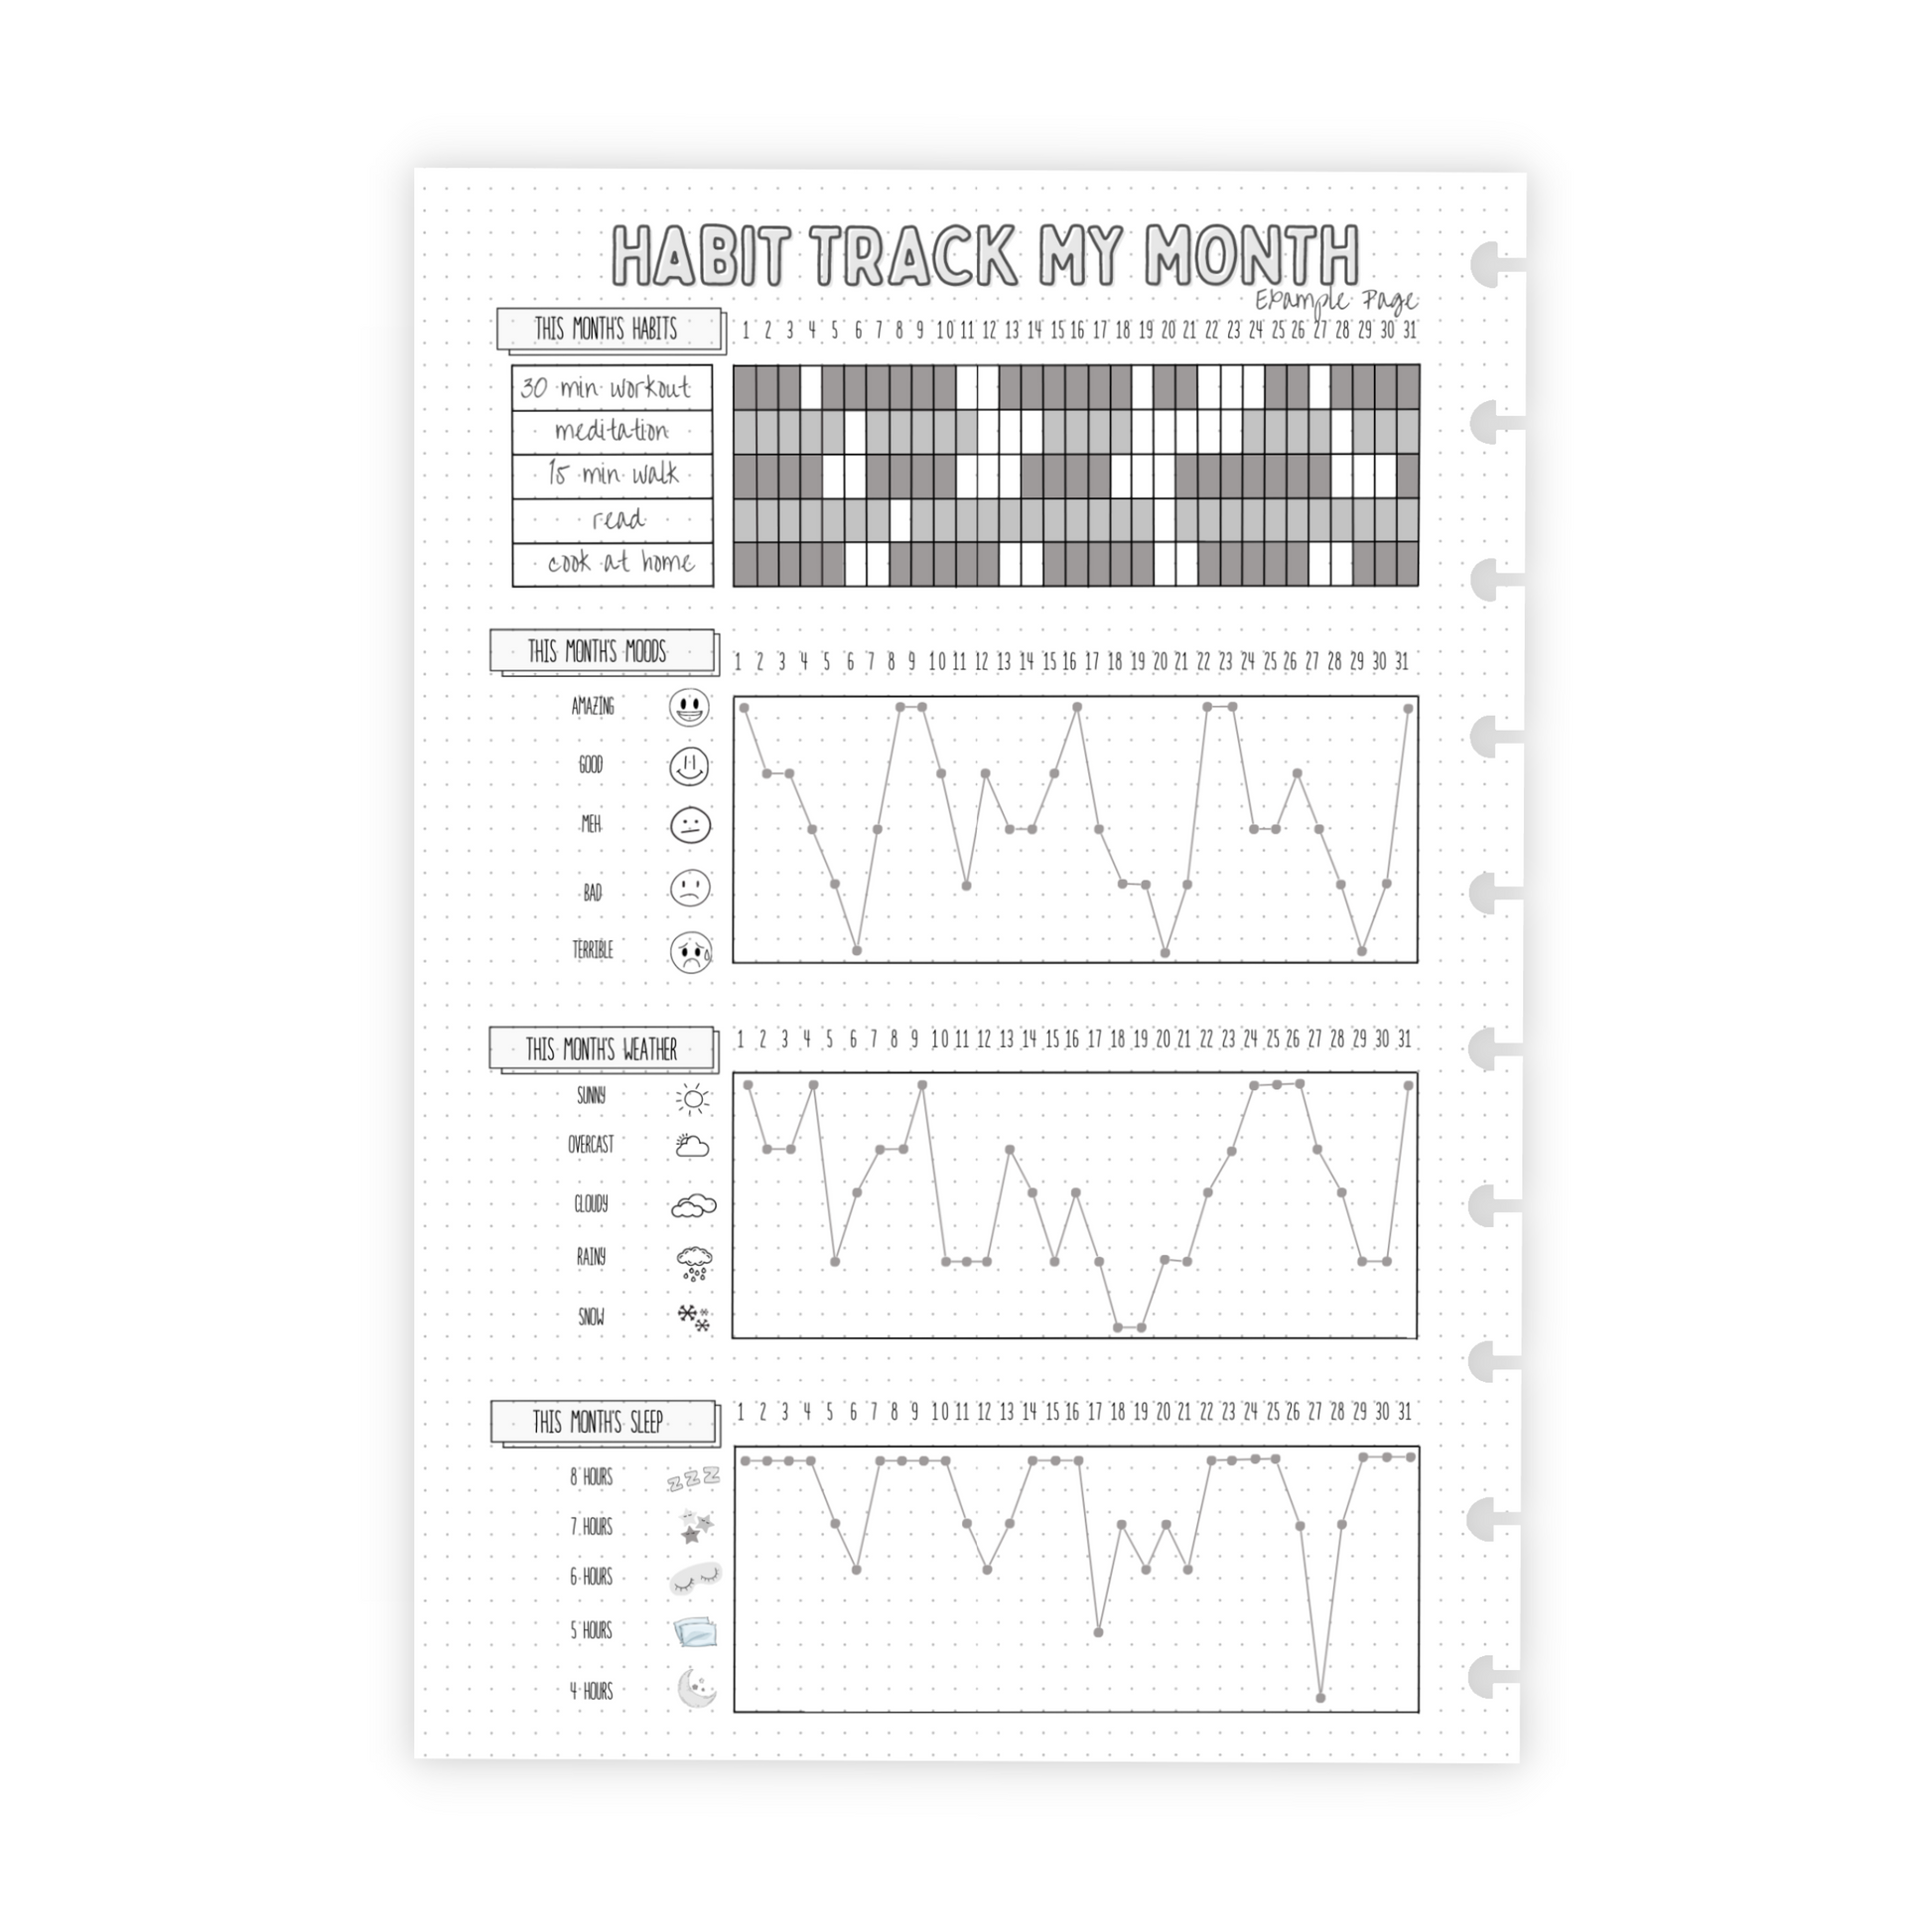 "Habit Track My Month" example page